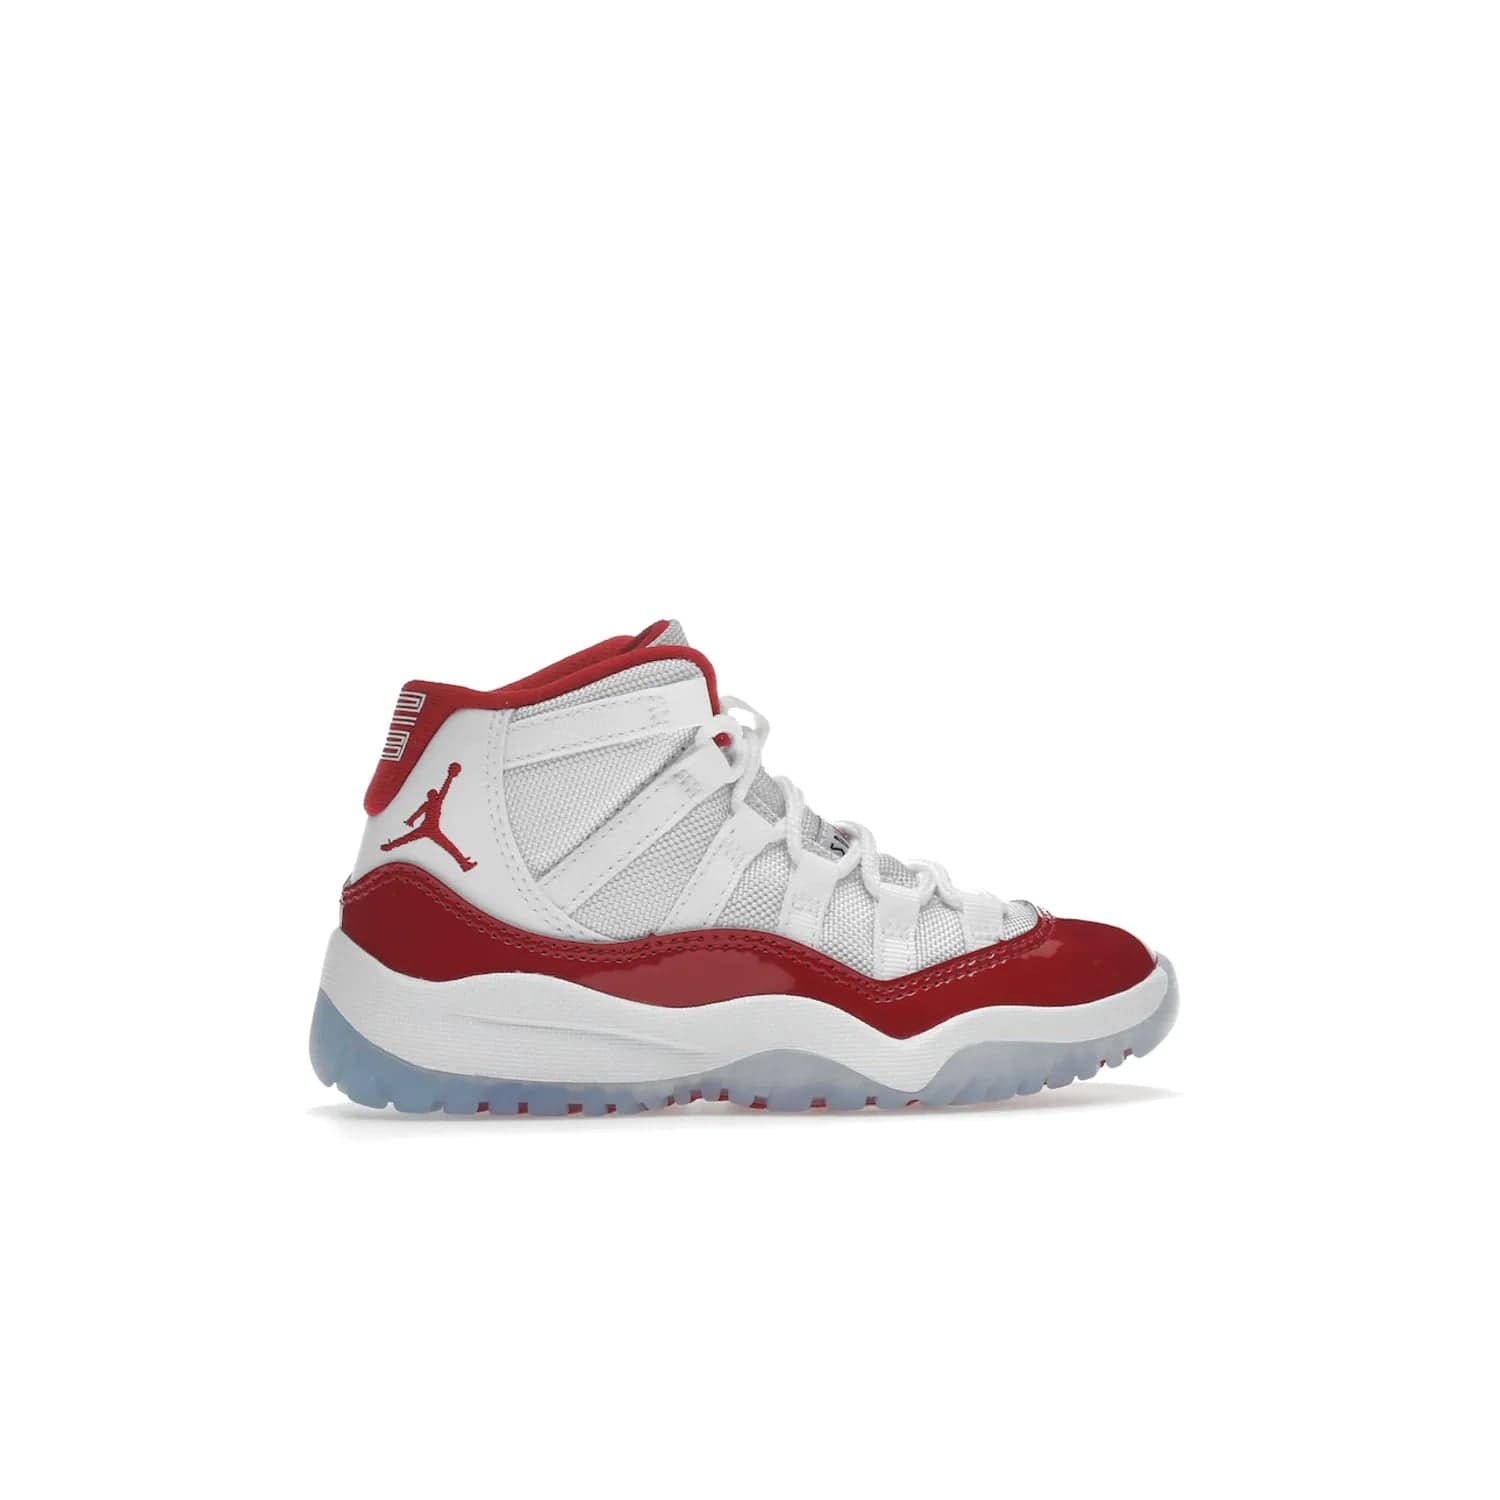 Jordan 11 Retro Cherry (2022) (PS) - Image 36 - Only at www.BallersClubKickz.com - An iconic silhouette with a timeless look, the Air Jordan 11 Retro Cherry 2022 PS features a crisp White, Varsity Red and Black colorway. The upper is made of ballistic mesh, a red patent leather mudguard, '23' branding and white Phylon midsole. Get optimal cushioning and comfort on December 10th, 2022. Don't miss out.